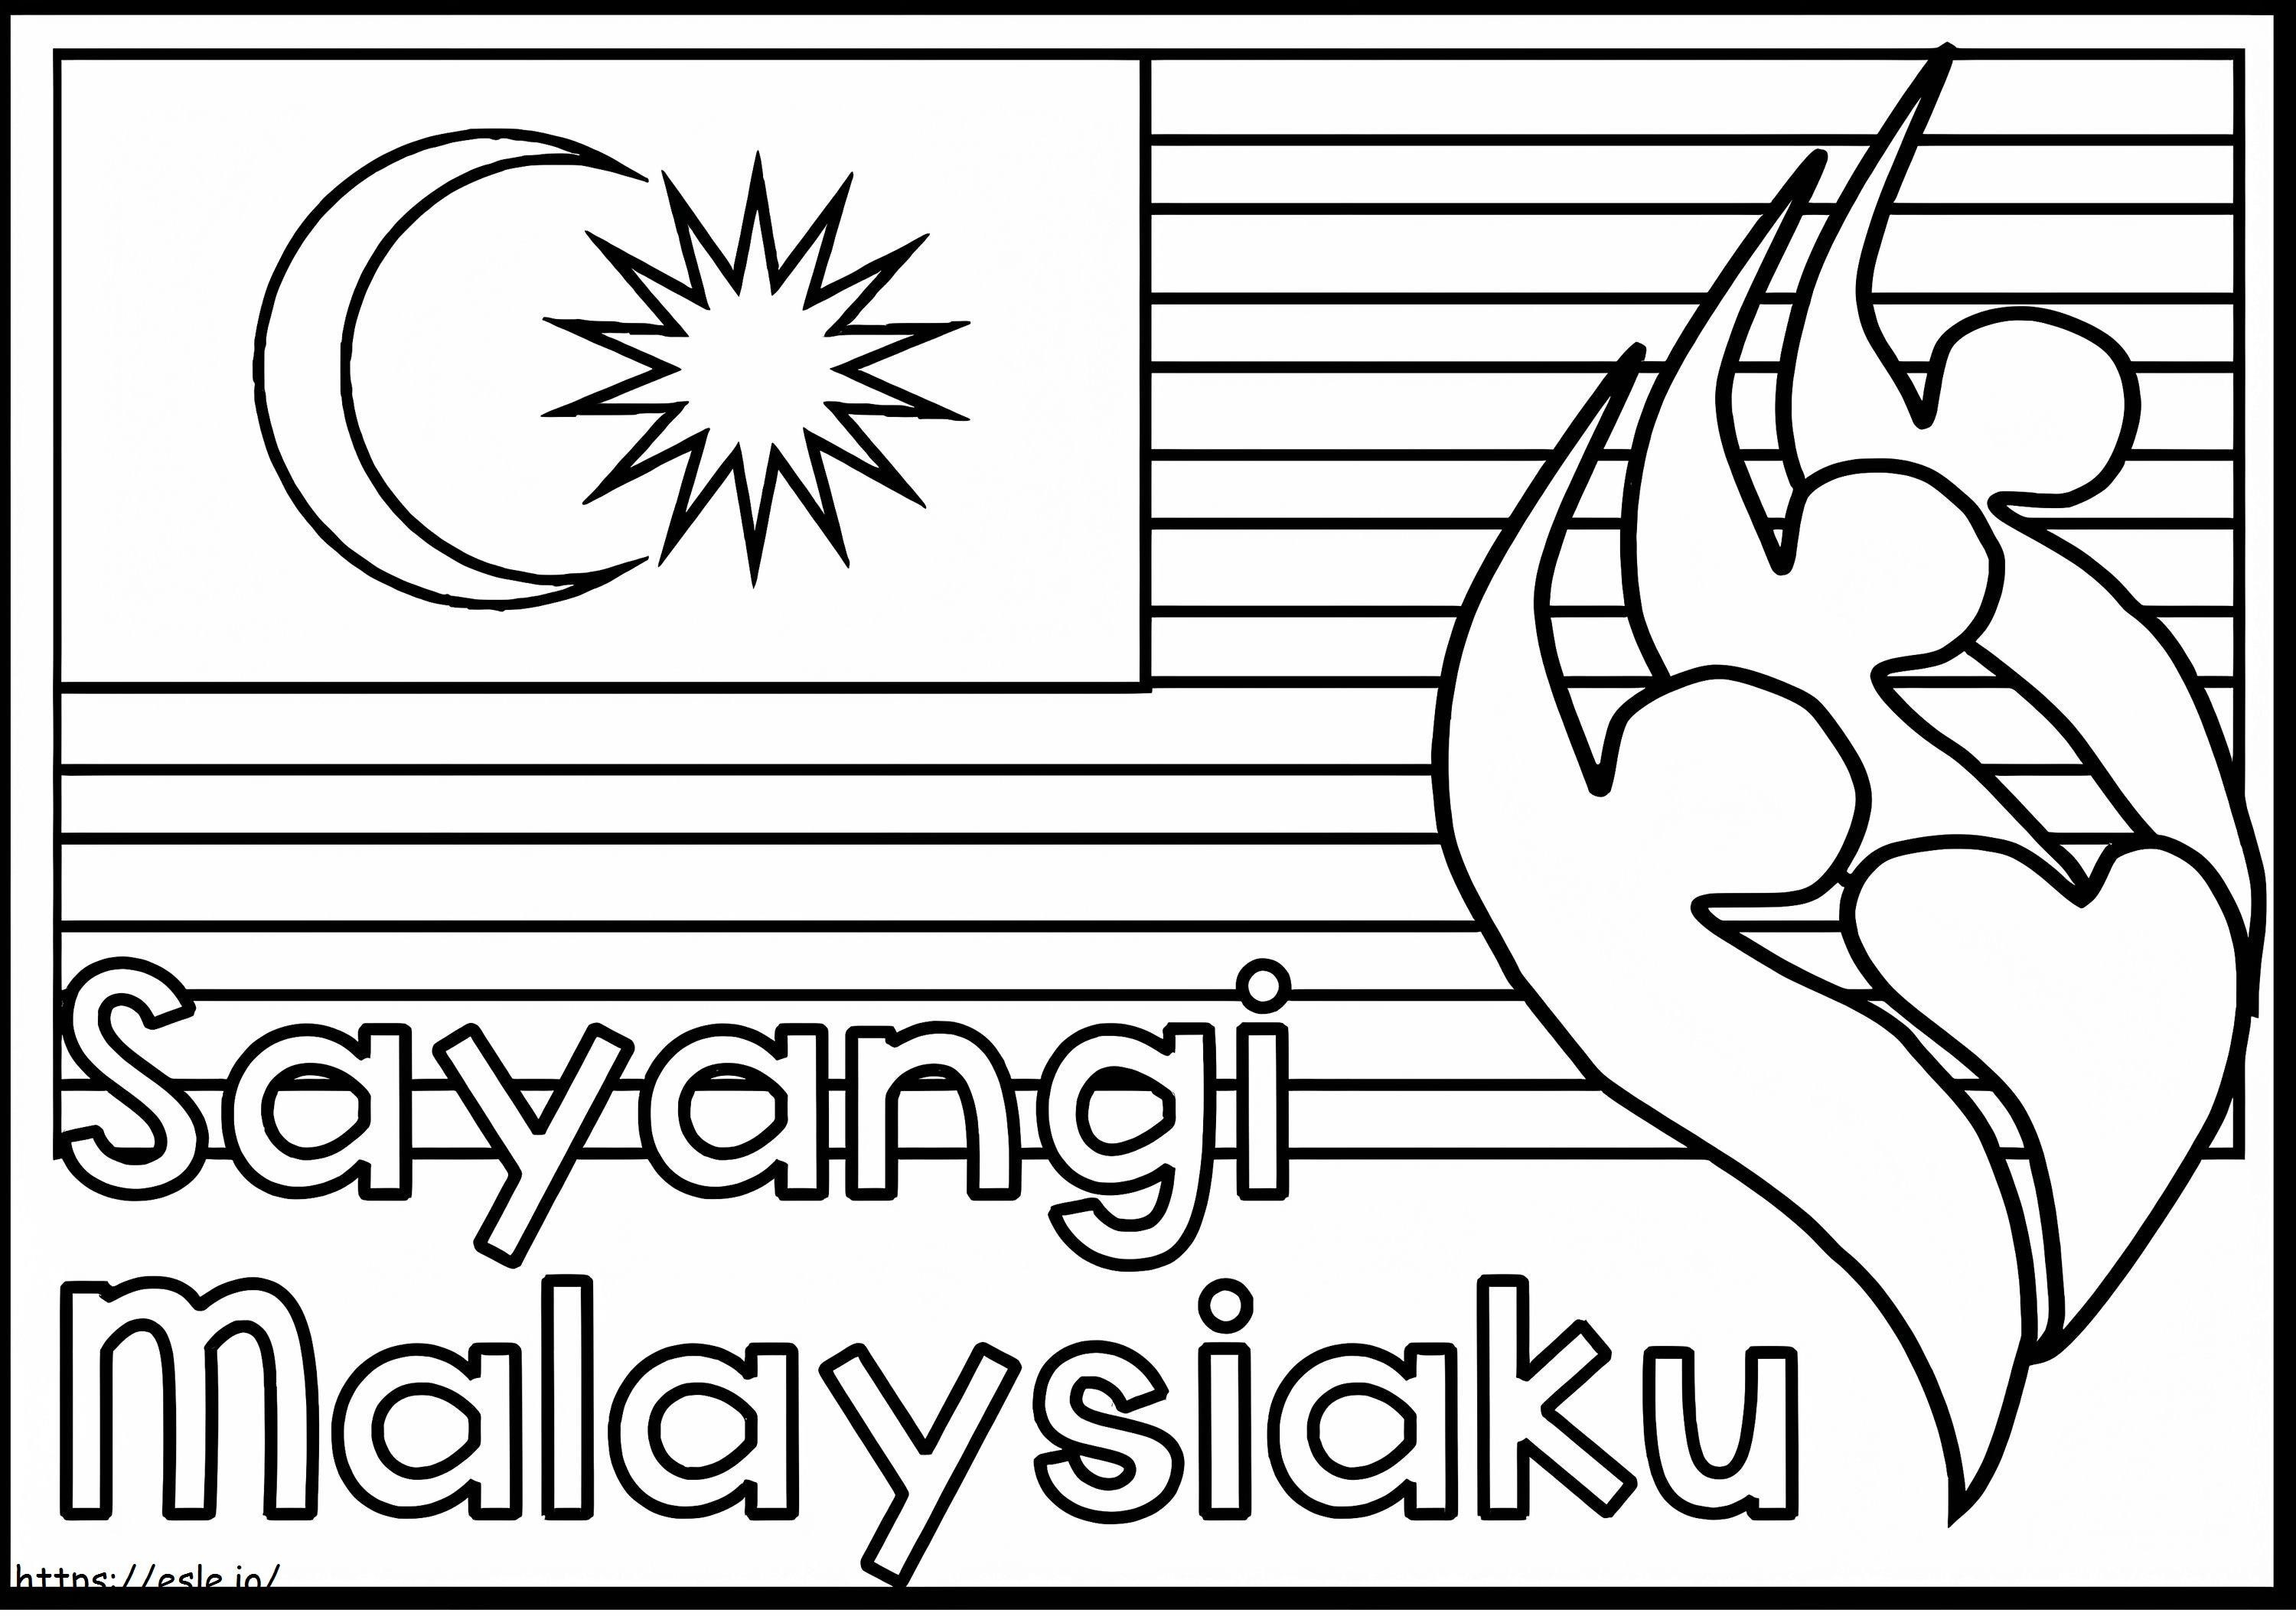 Malaysia 1 coloring page